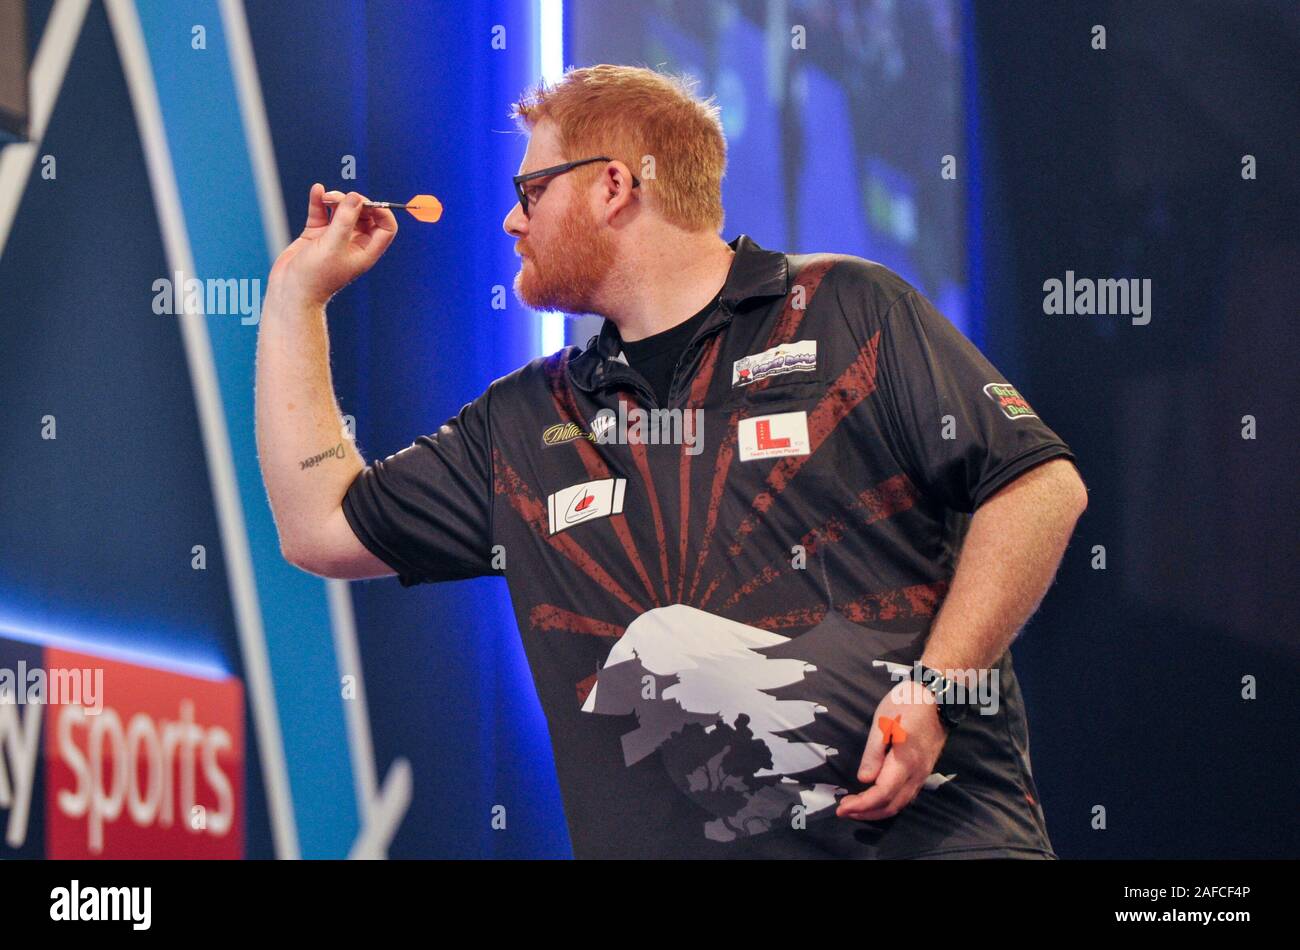 ulækkert Vedholdende Boost 14 december 2019 London, Great Britain William Hill World Darts  Championship Matt Campbell during day 2 of the William Hill World Darts  Championship of darts at Alexandra Palace (Ally Pally) in Londen